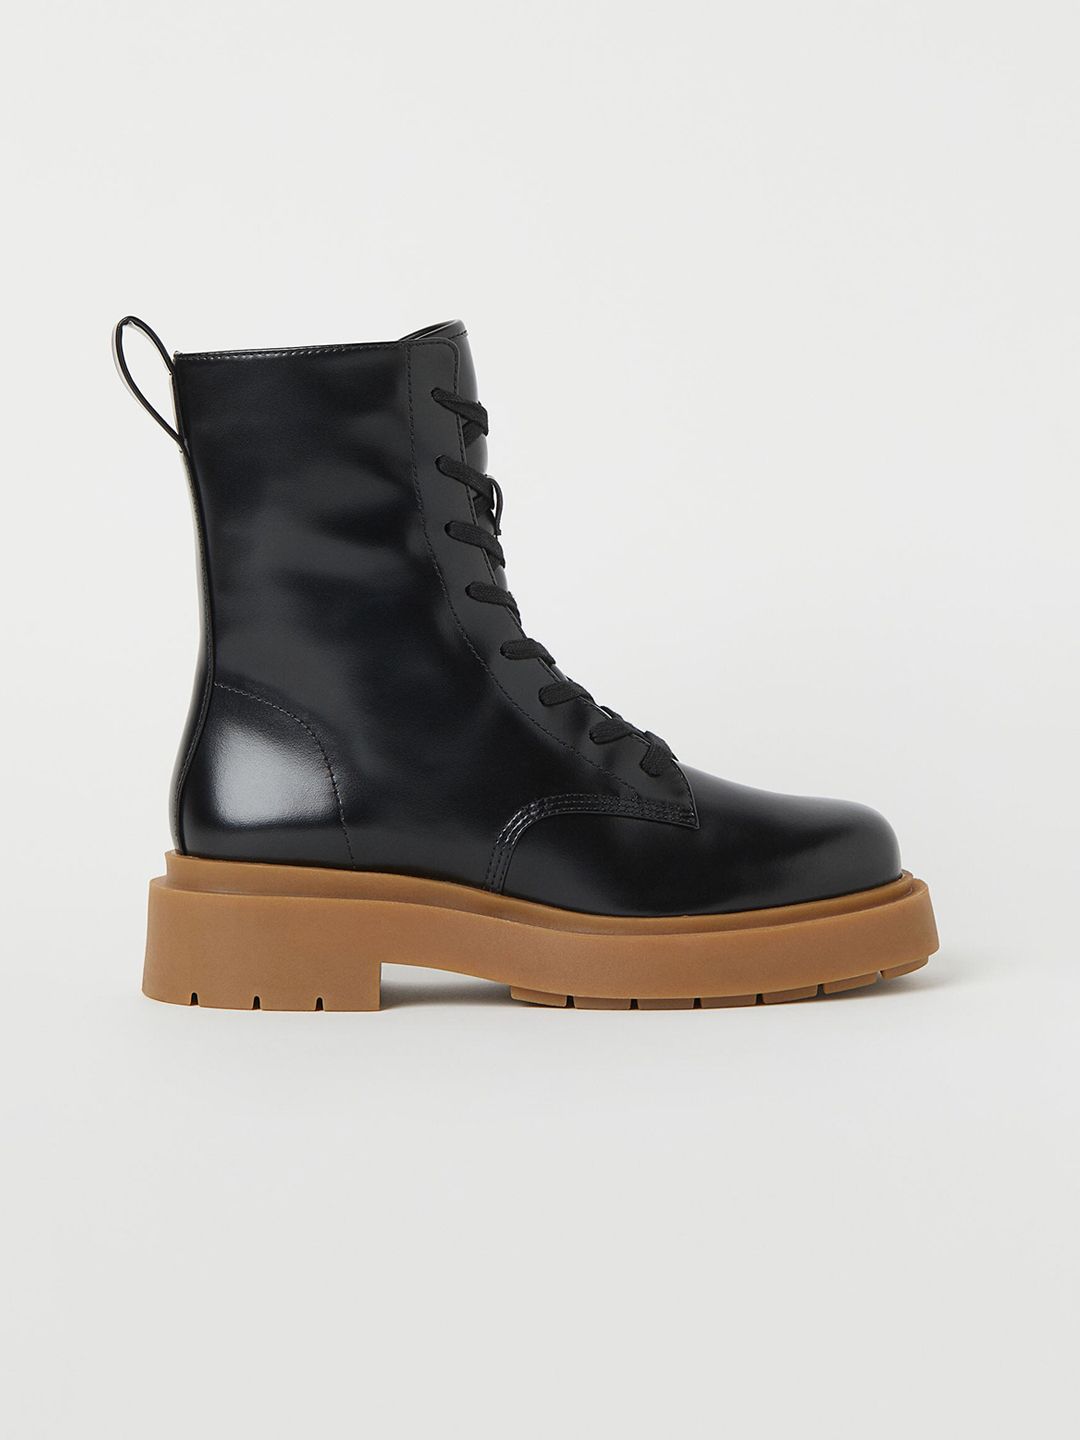 H&M Women Black Solid Mid Top Flat Boots Price in India